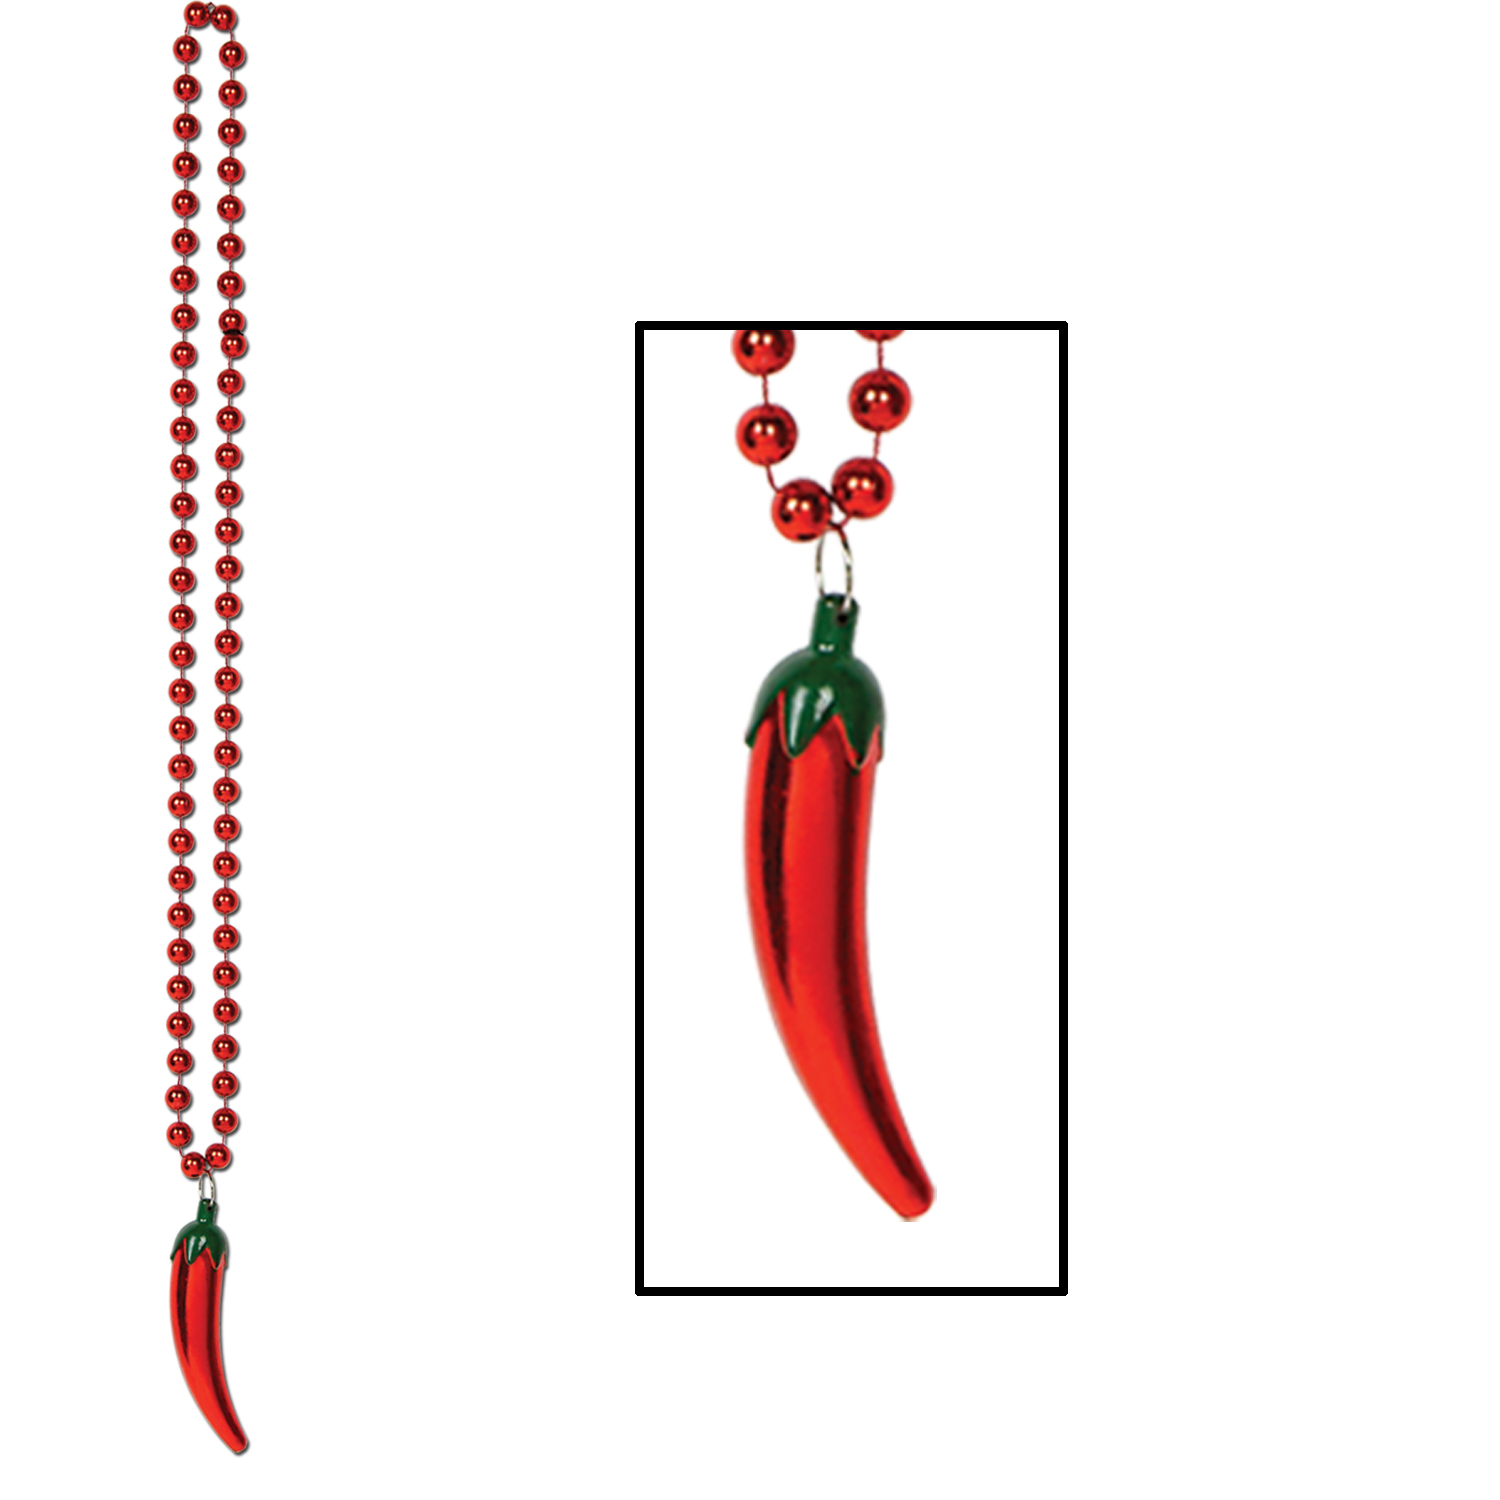 12 Pieces of Beads w/Chili Pepper Medallion